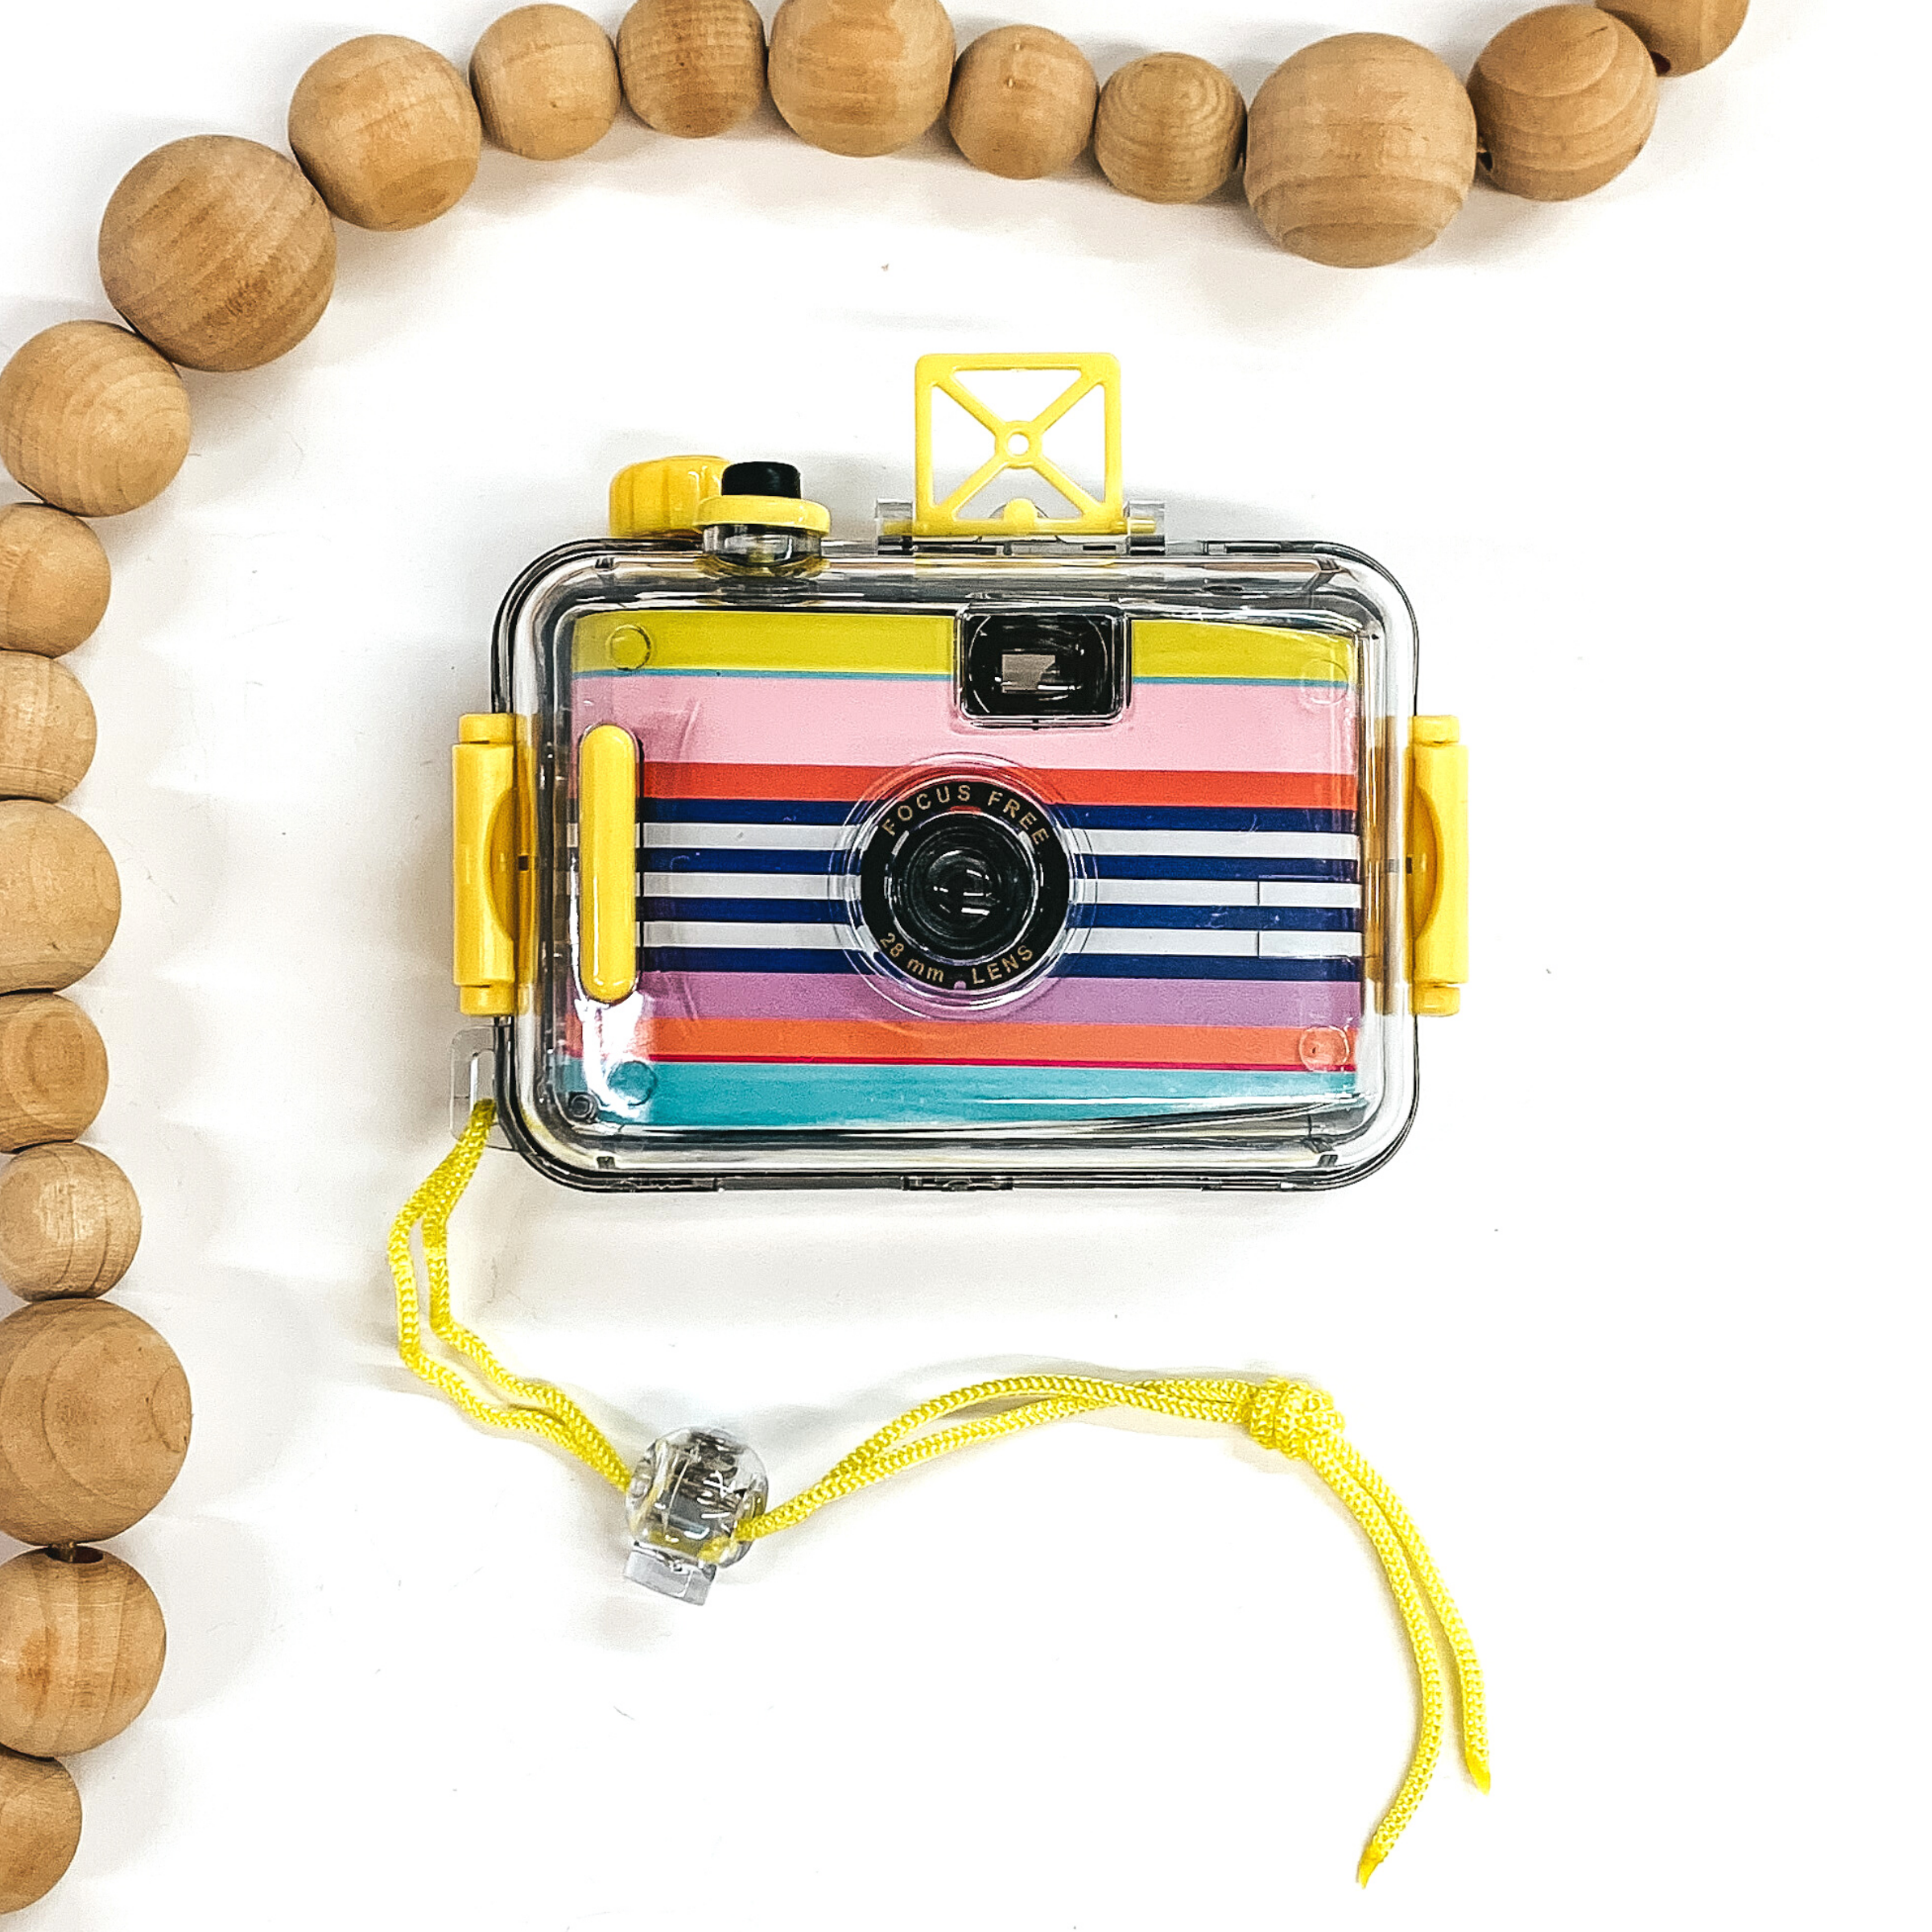 Multicolored striped camera in a clear case with yellow accents. This camera is pictured on a white background with tan beads around the top left corner. 